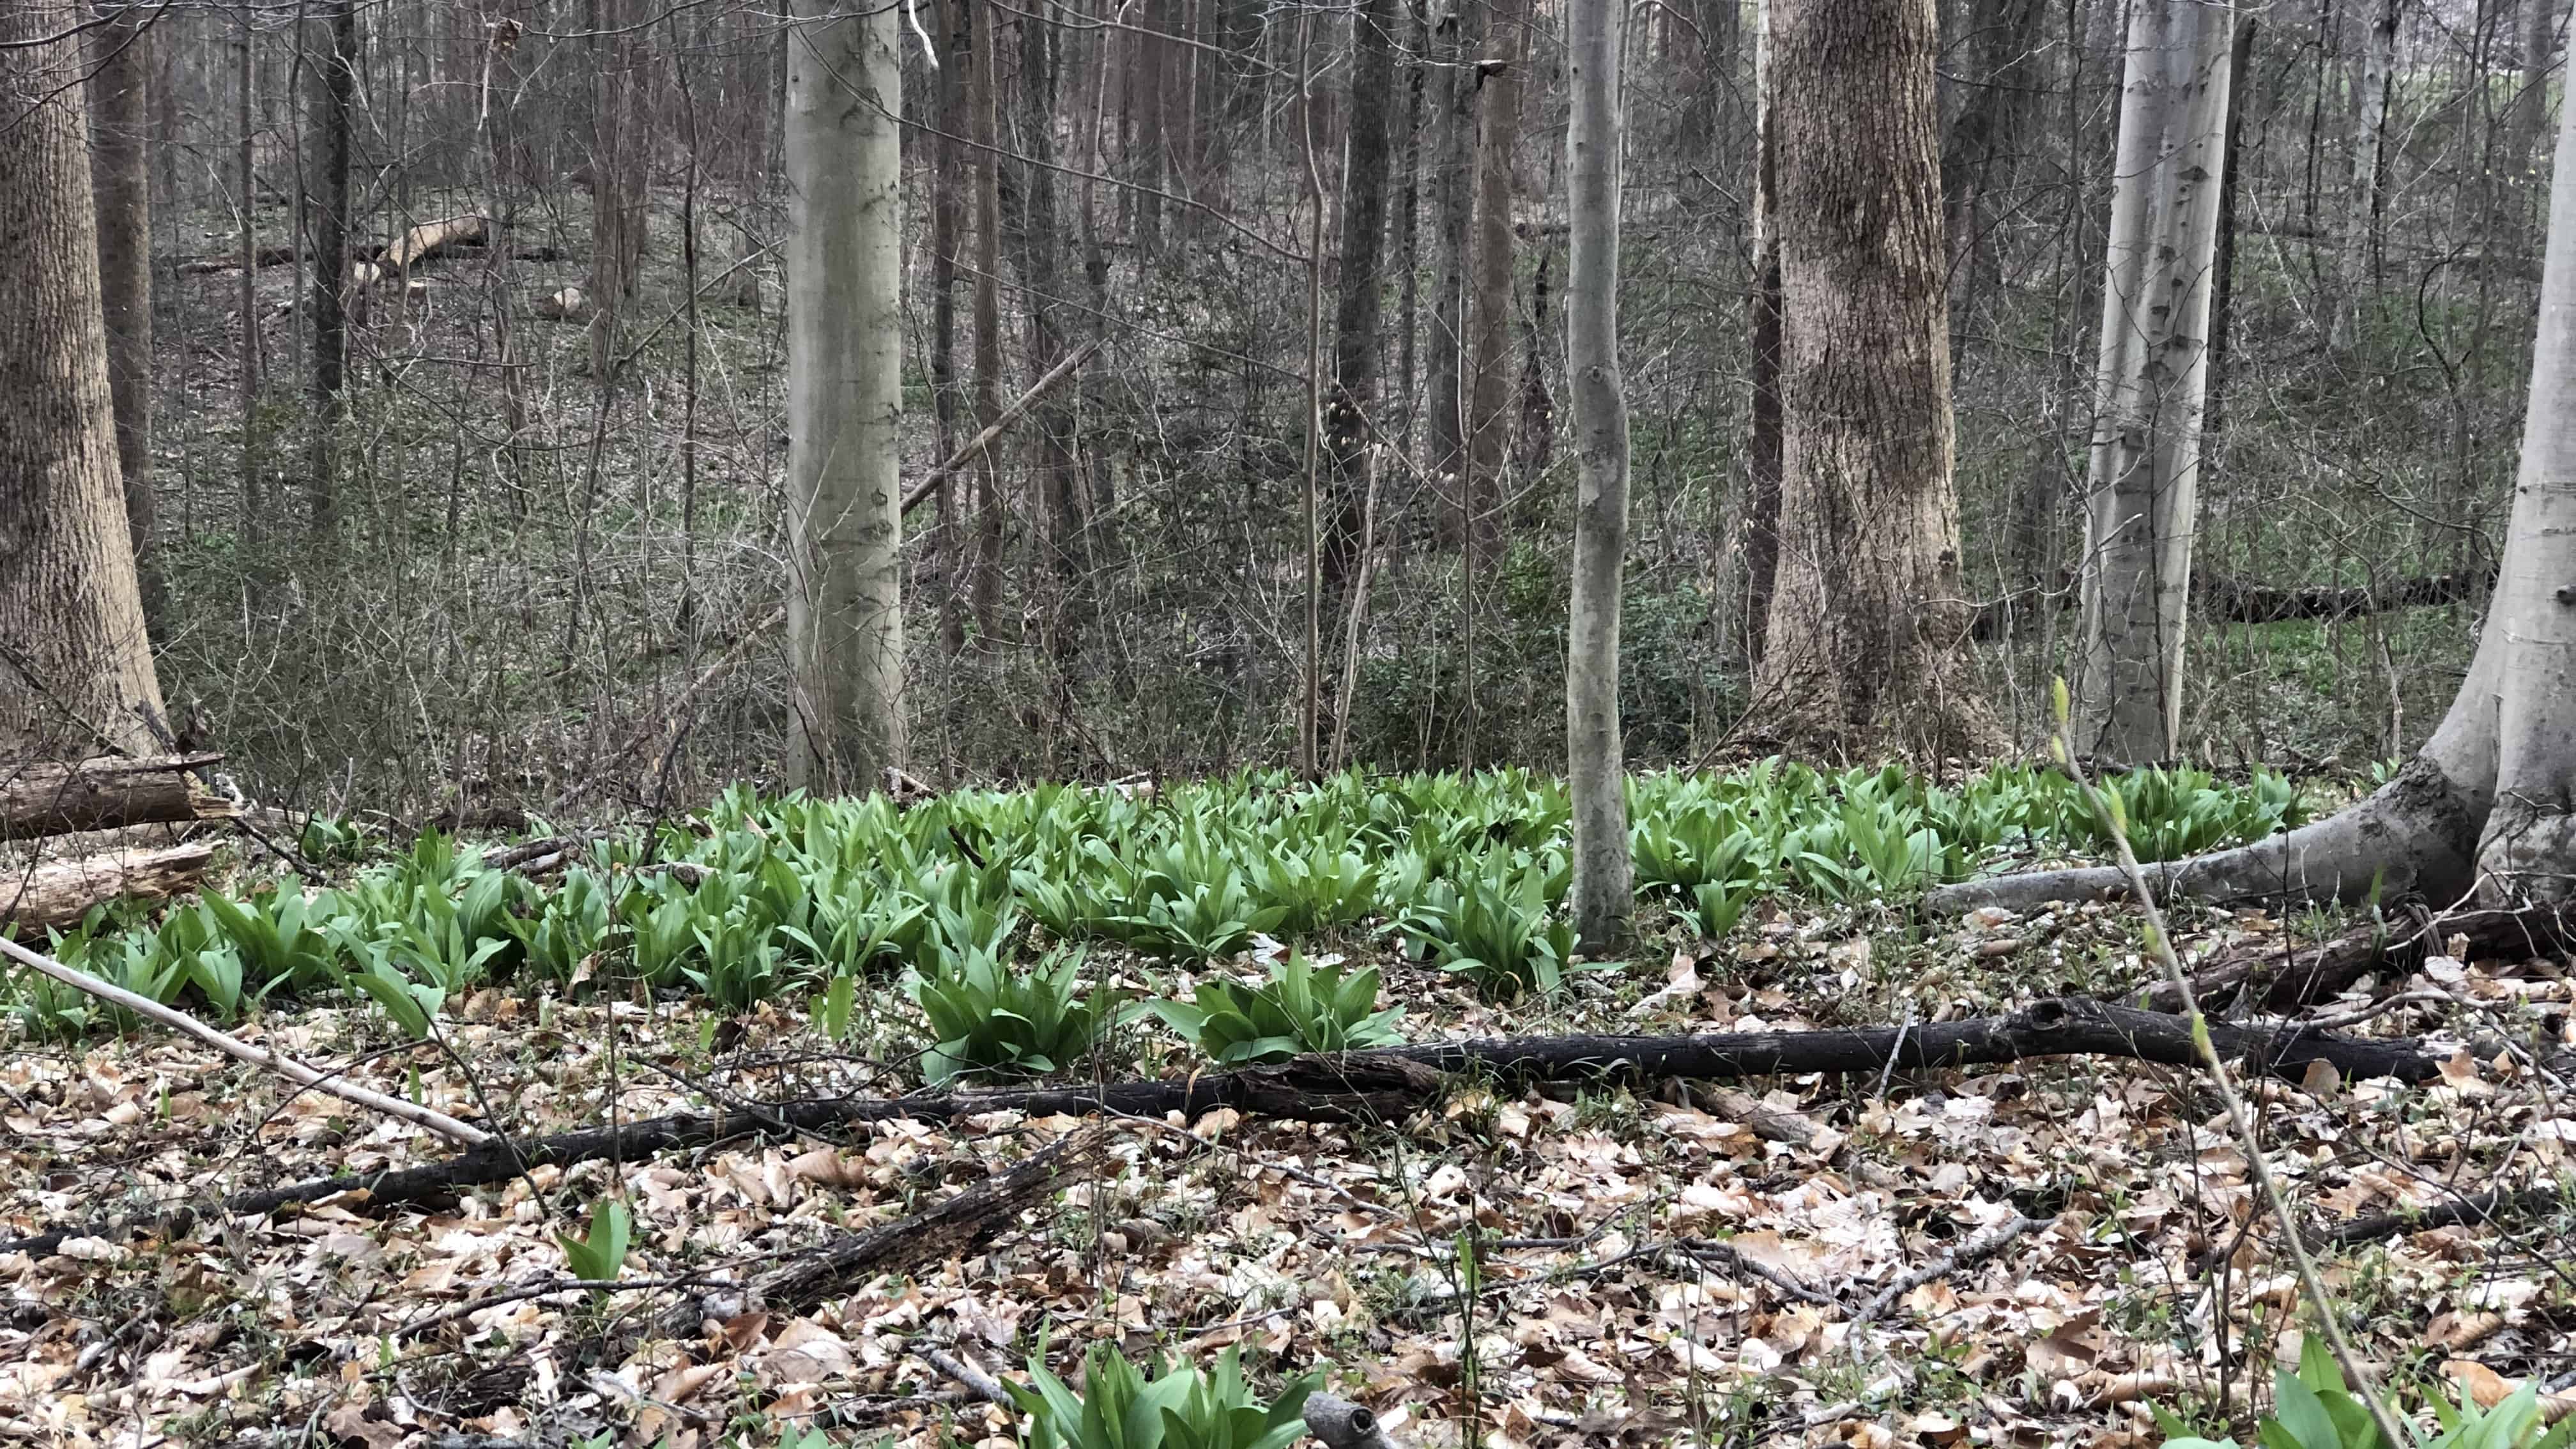 A large patch of ramps in Northern Virginia.